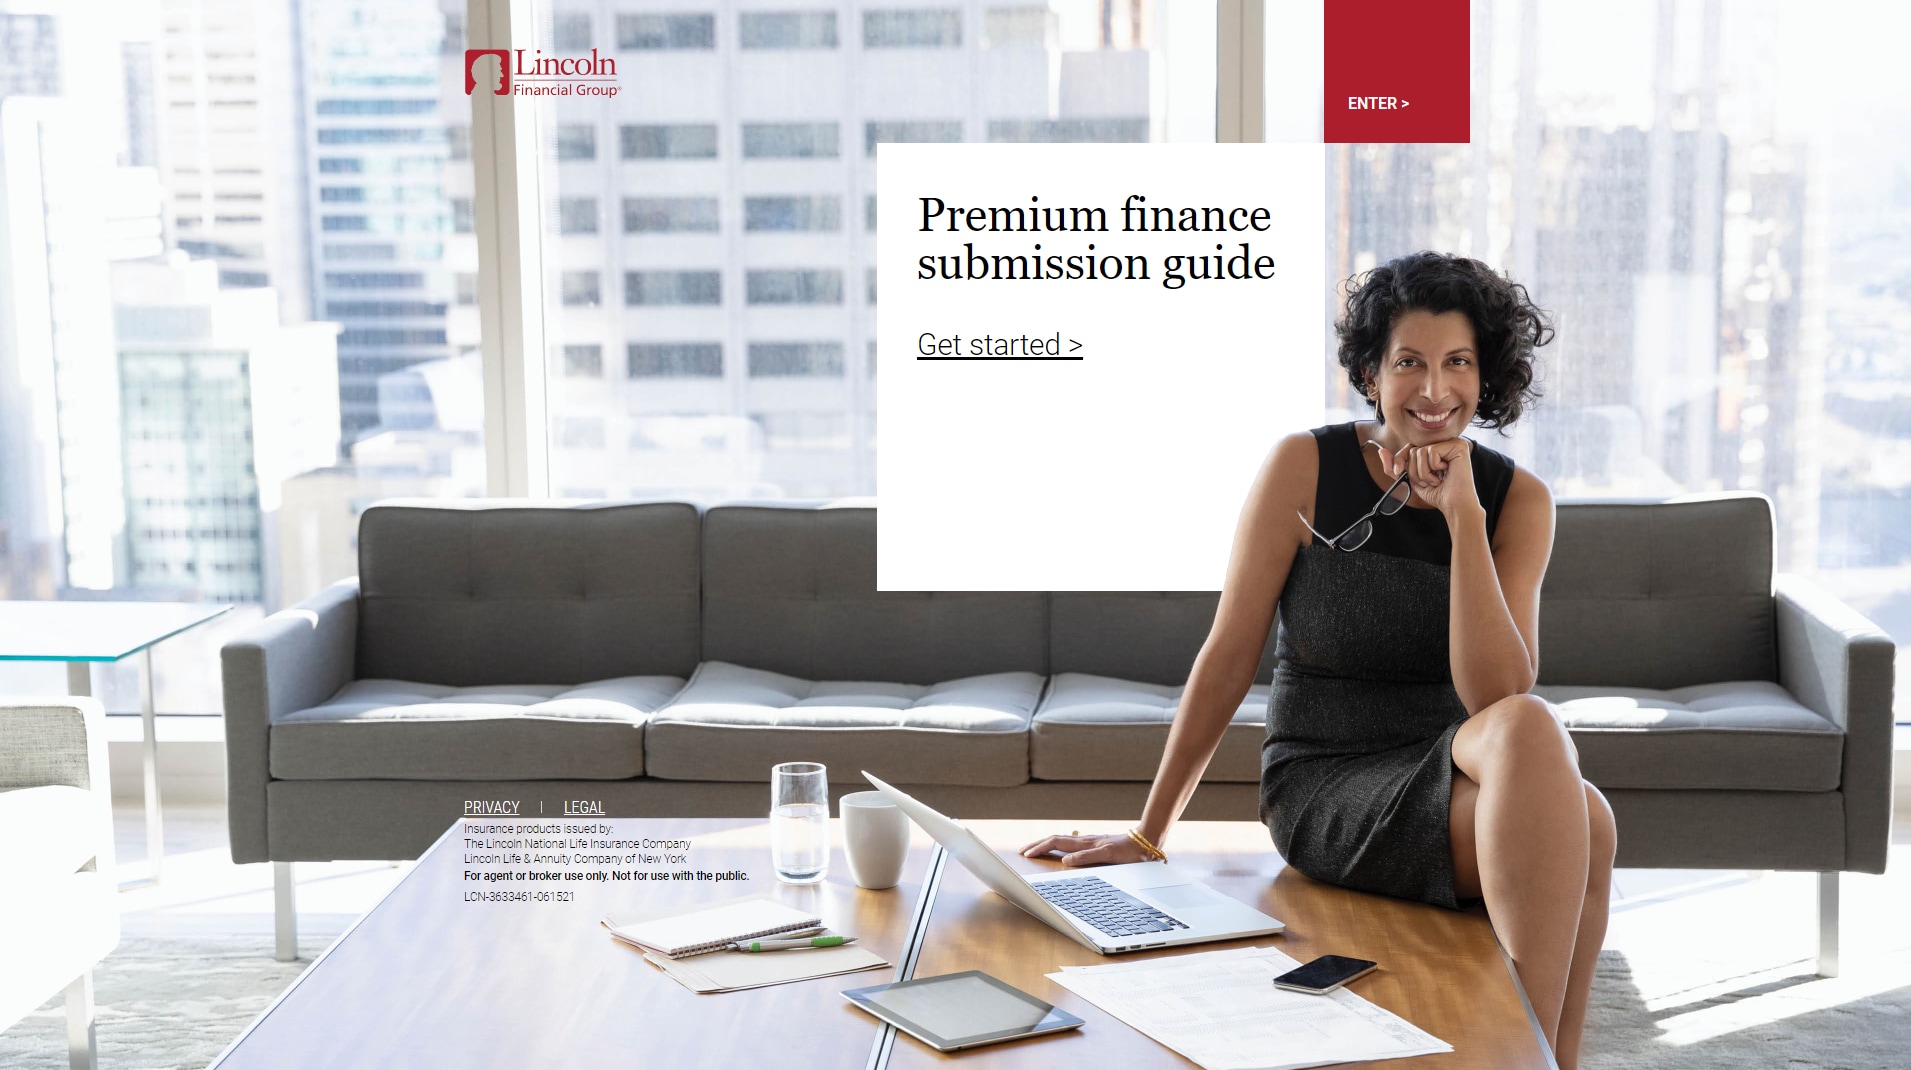 Premium Finance Submission Guide Clickable Image